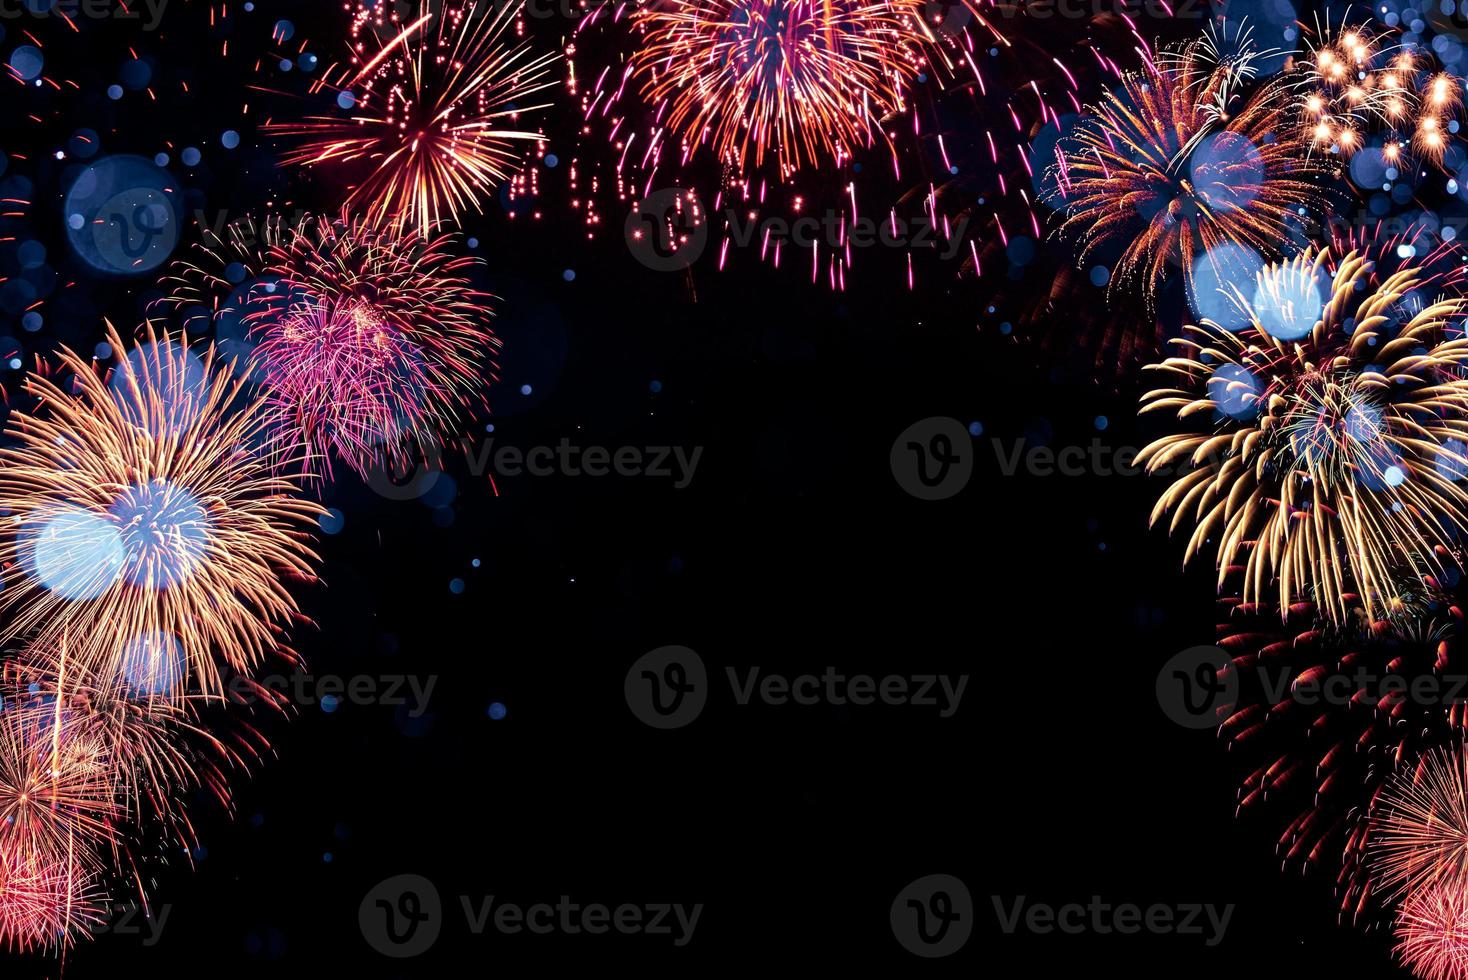 Fireworks with Abstract bokeh background photo